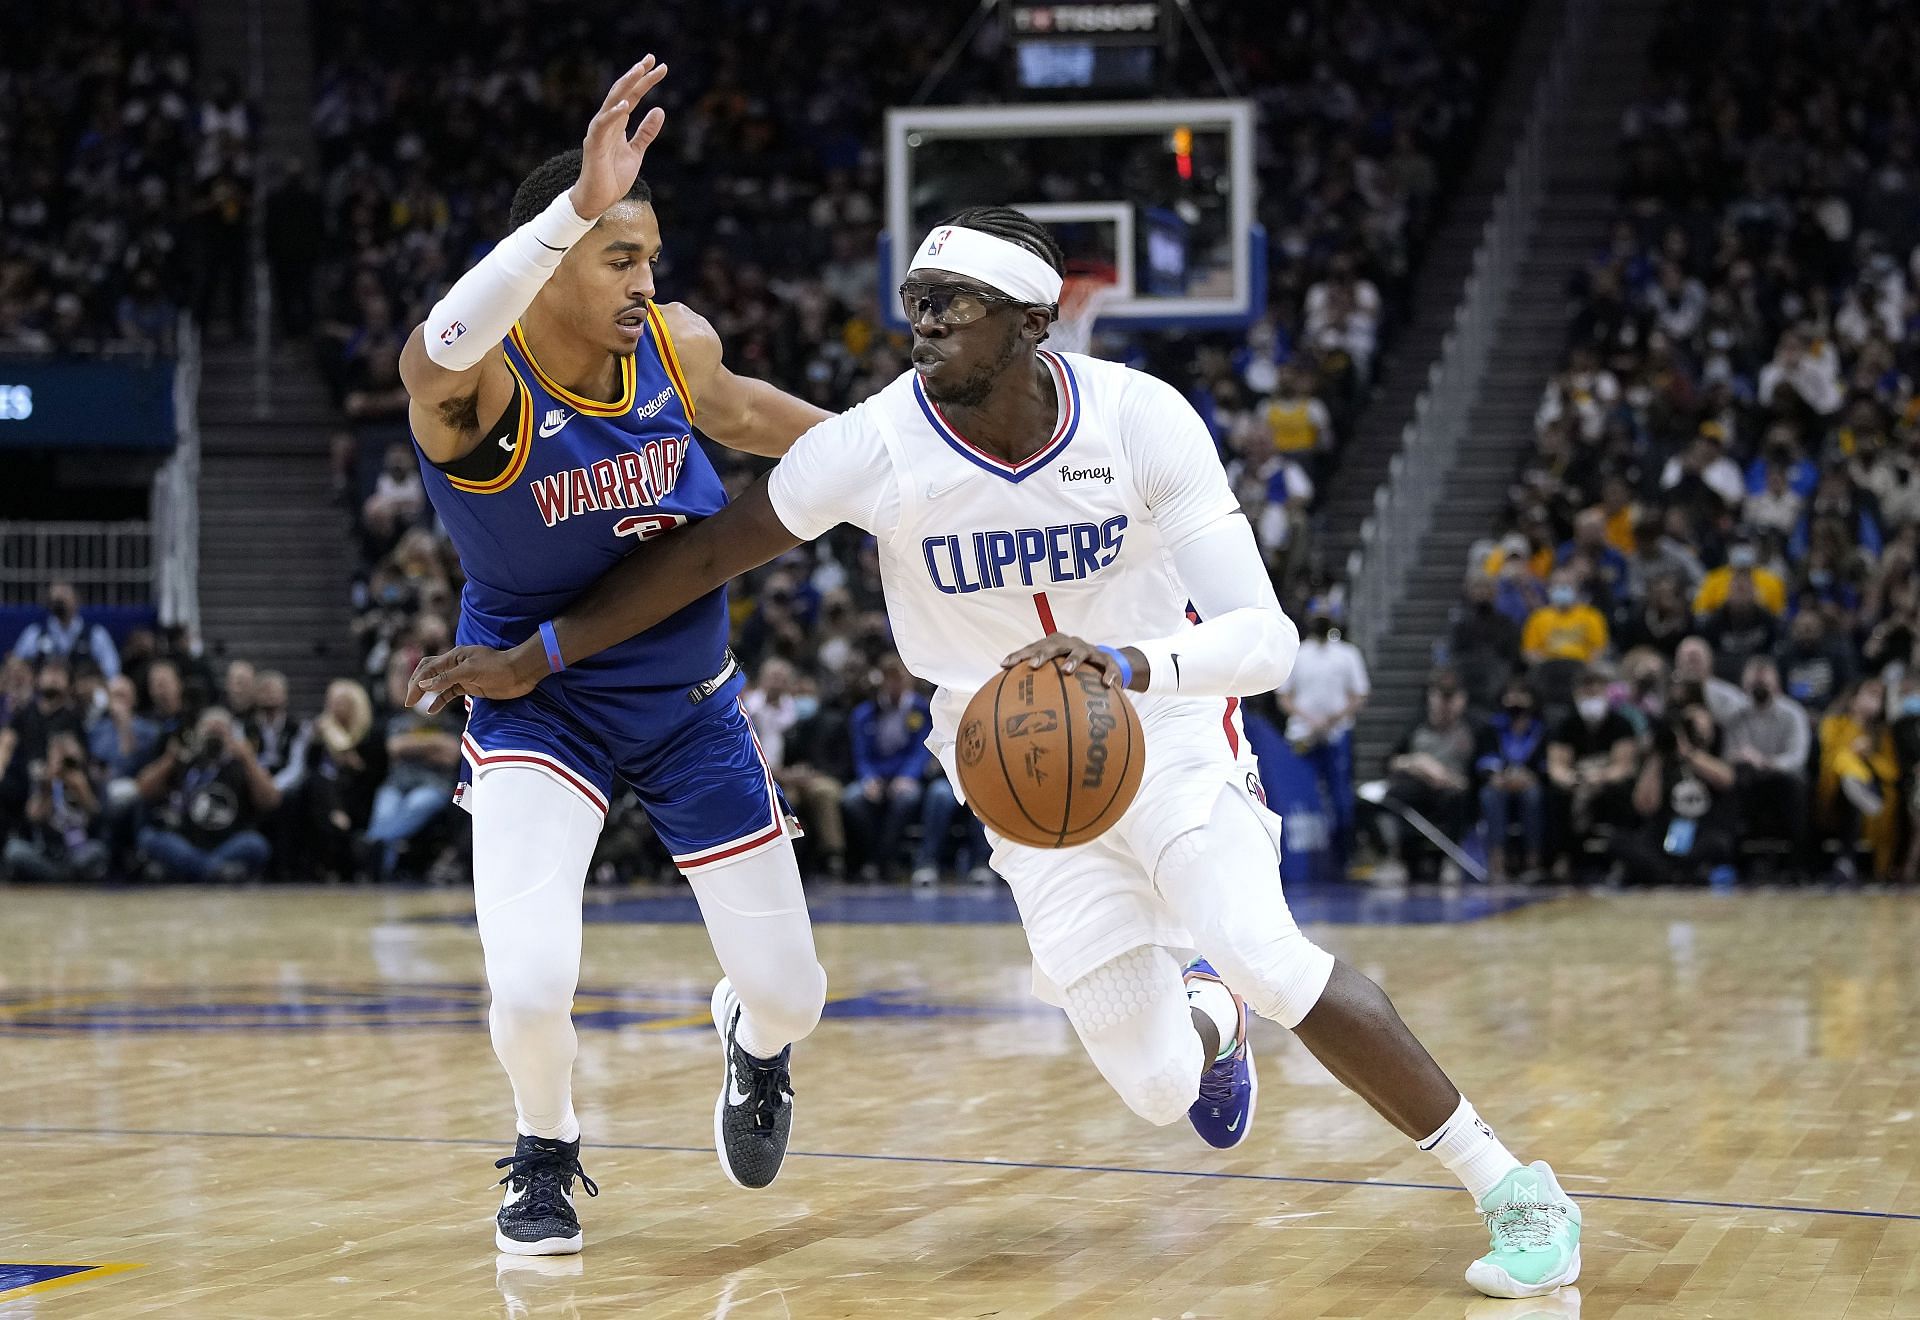 LA Clippers role player Reggie Jackson #1 driving into the paint